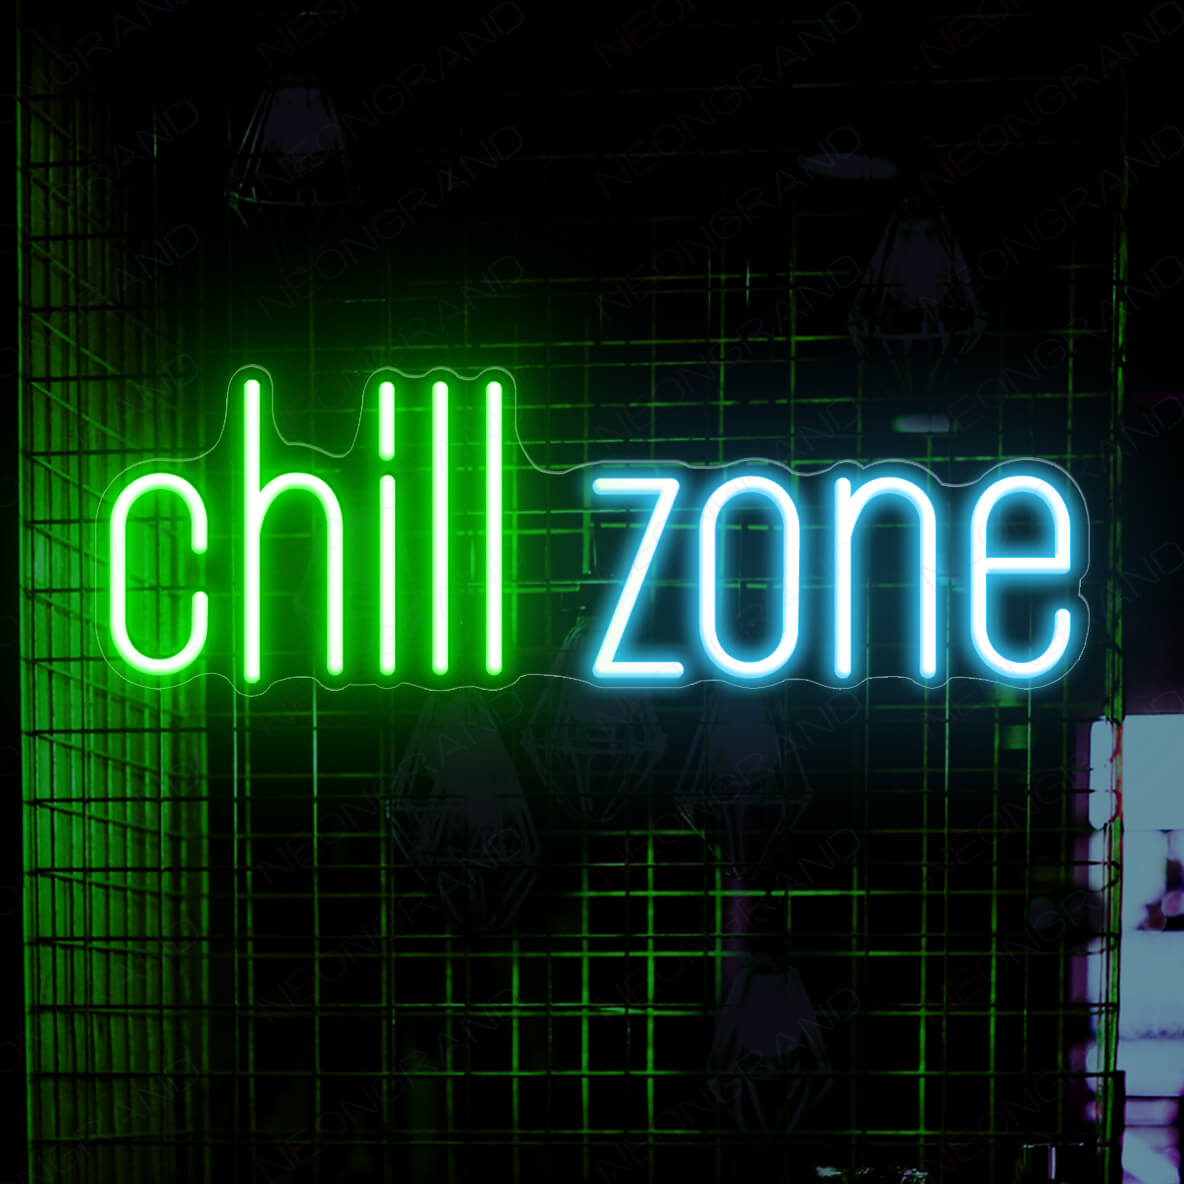 Chill Zone Neon Sign Led Chill Neon Light Sign light blue